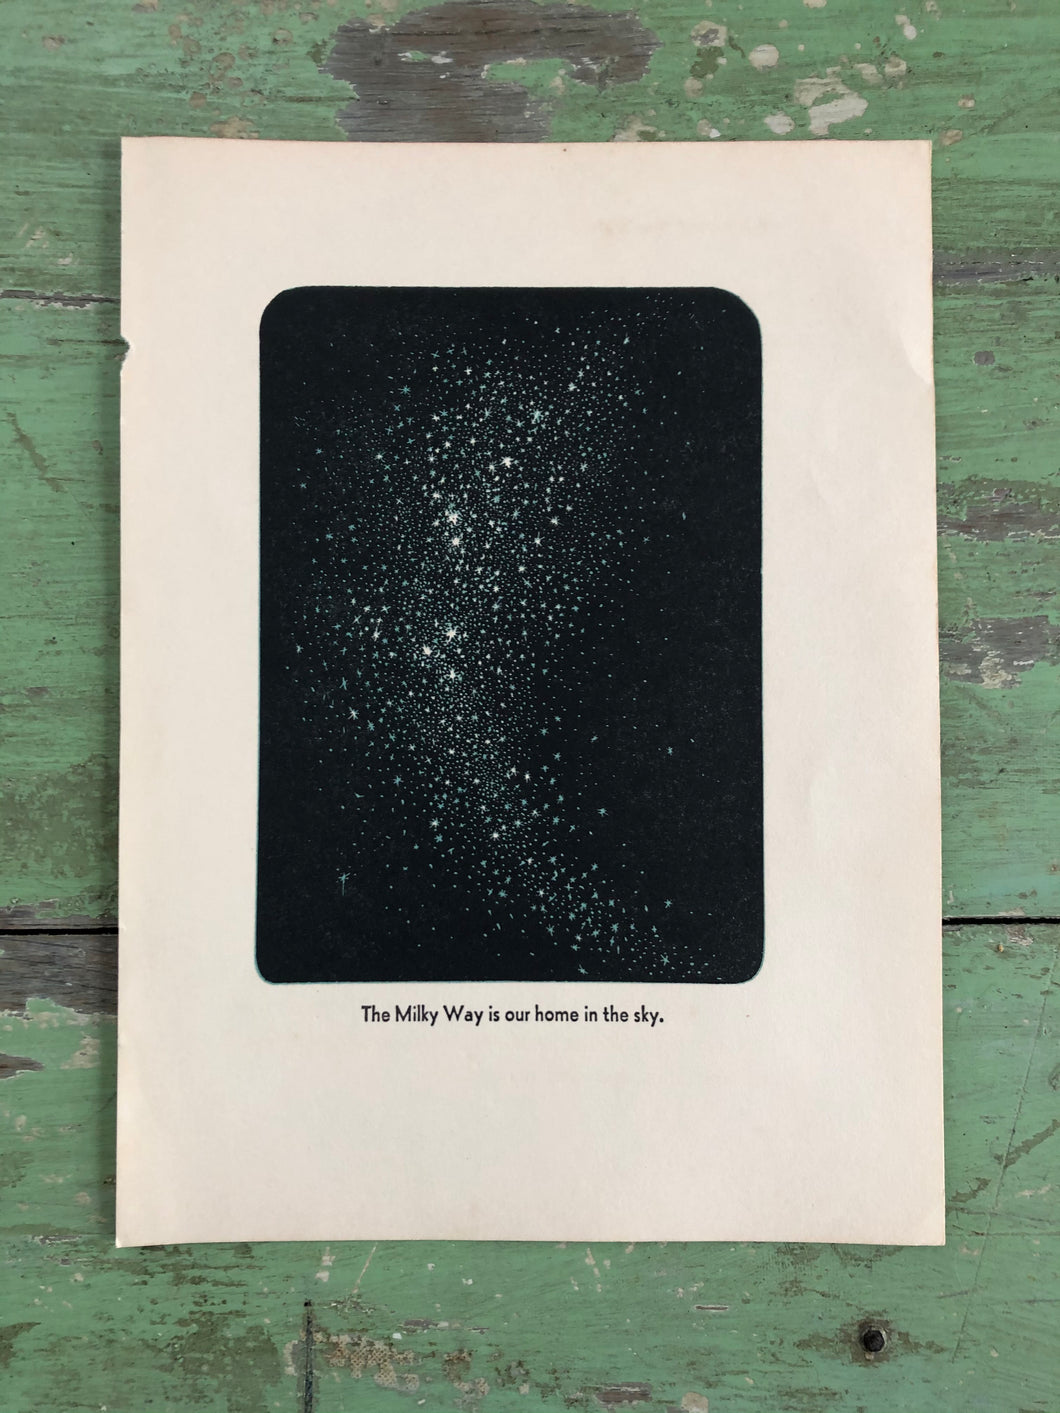 Print from “All About the Stars” illustrated by Martin Bileck